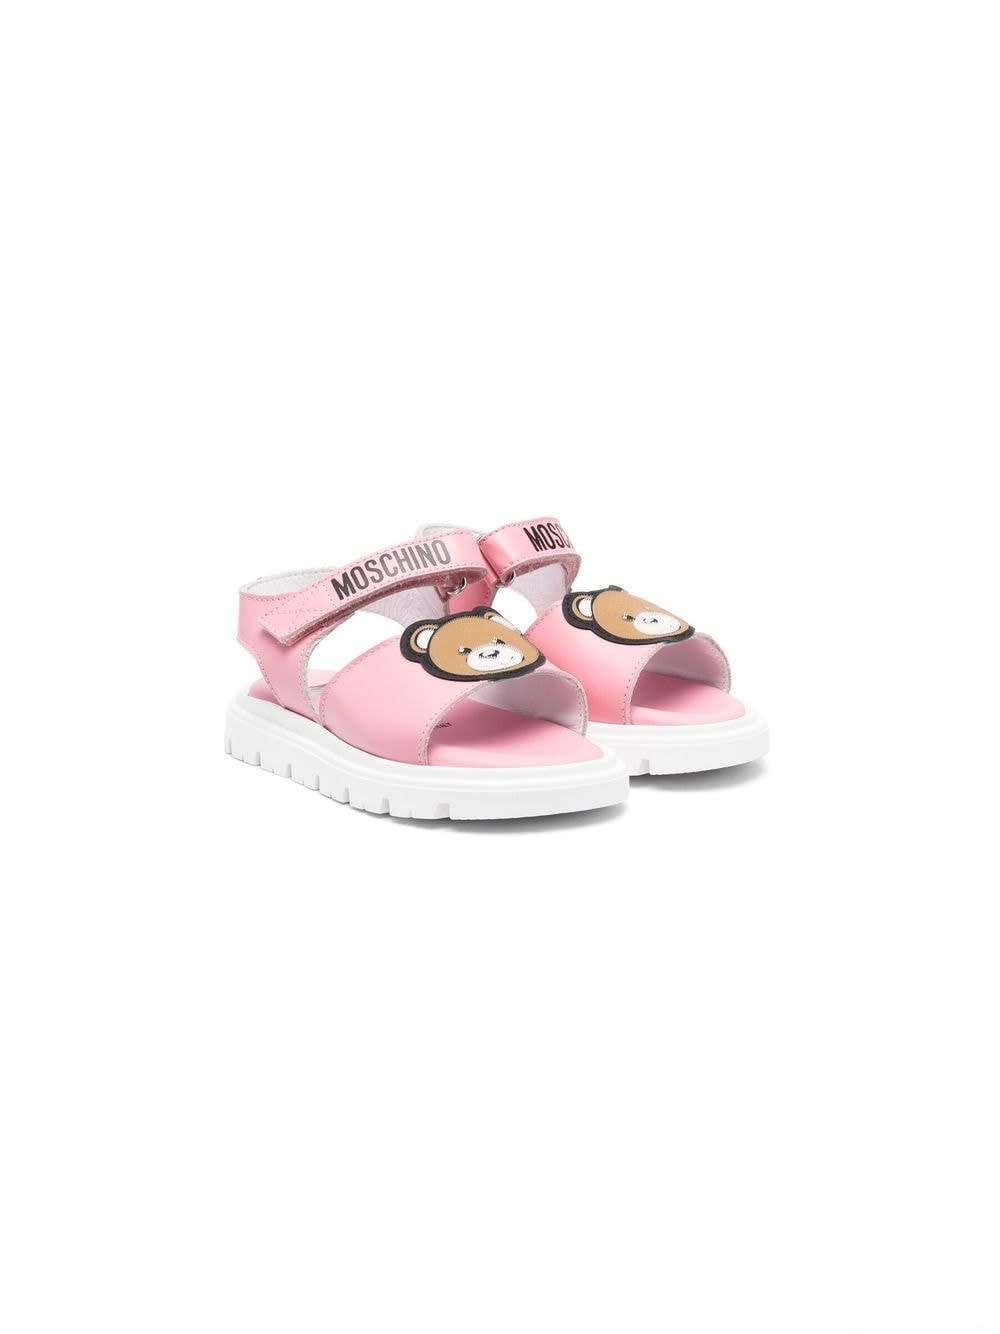 MOSCHINO TEDDY BEAR SANDALS WITH APPLICATION